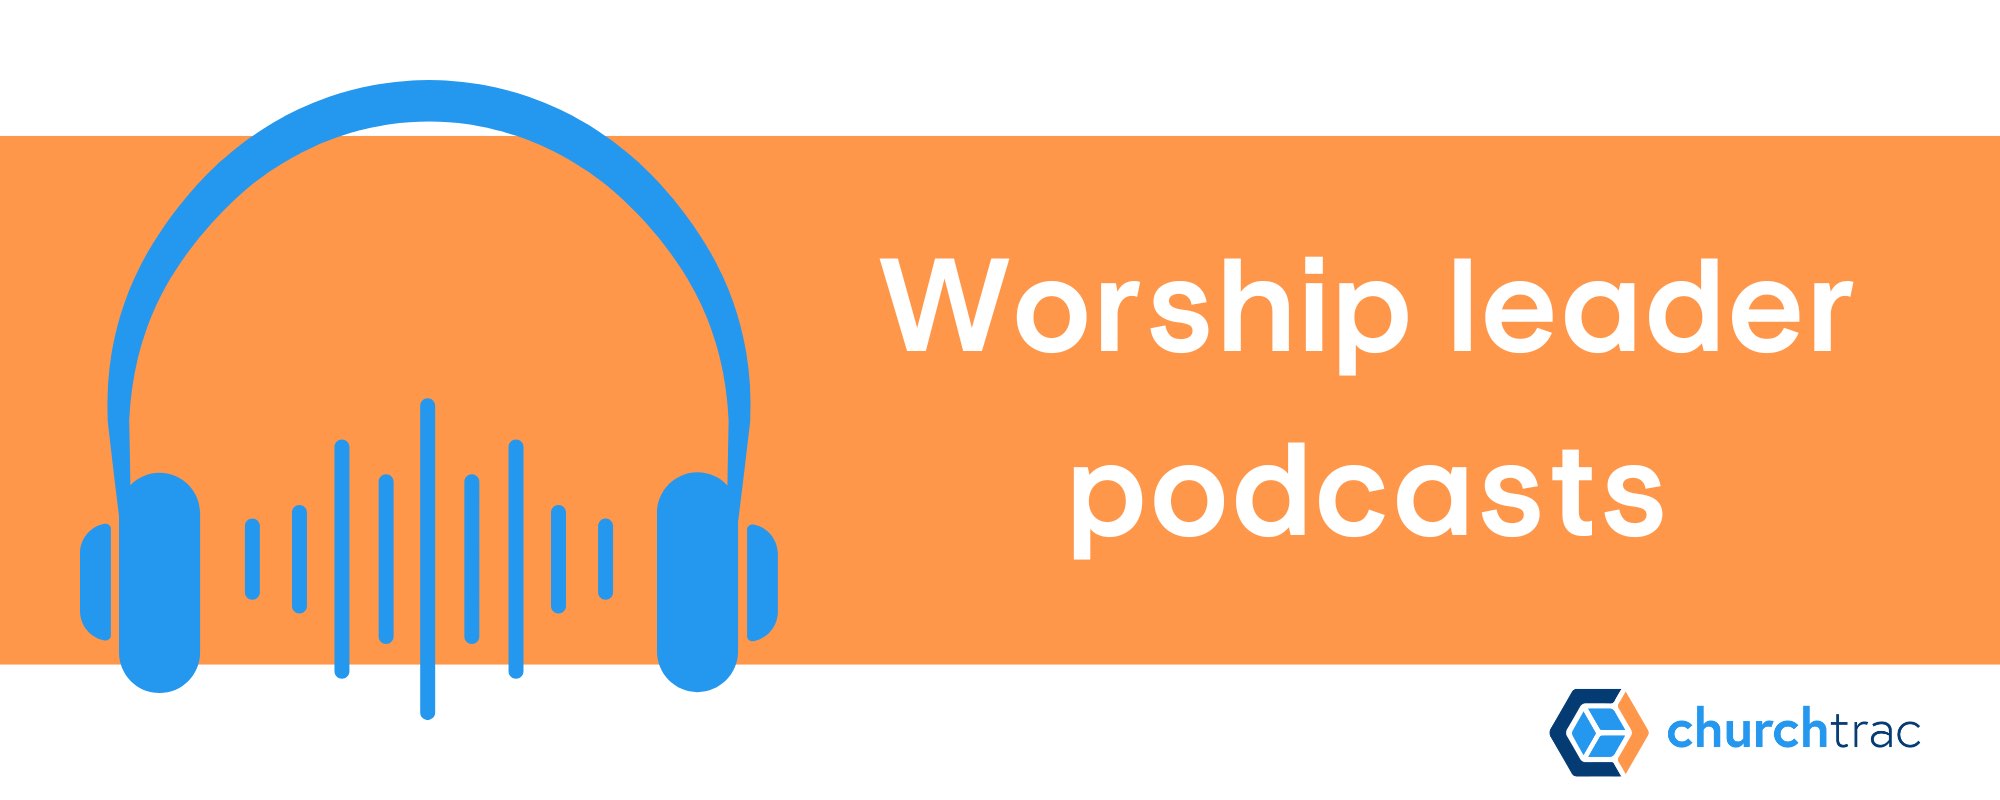 Worship leader podcasts are a great resource for worship pastors, worship leaders, and worship teams